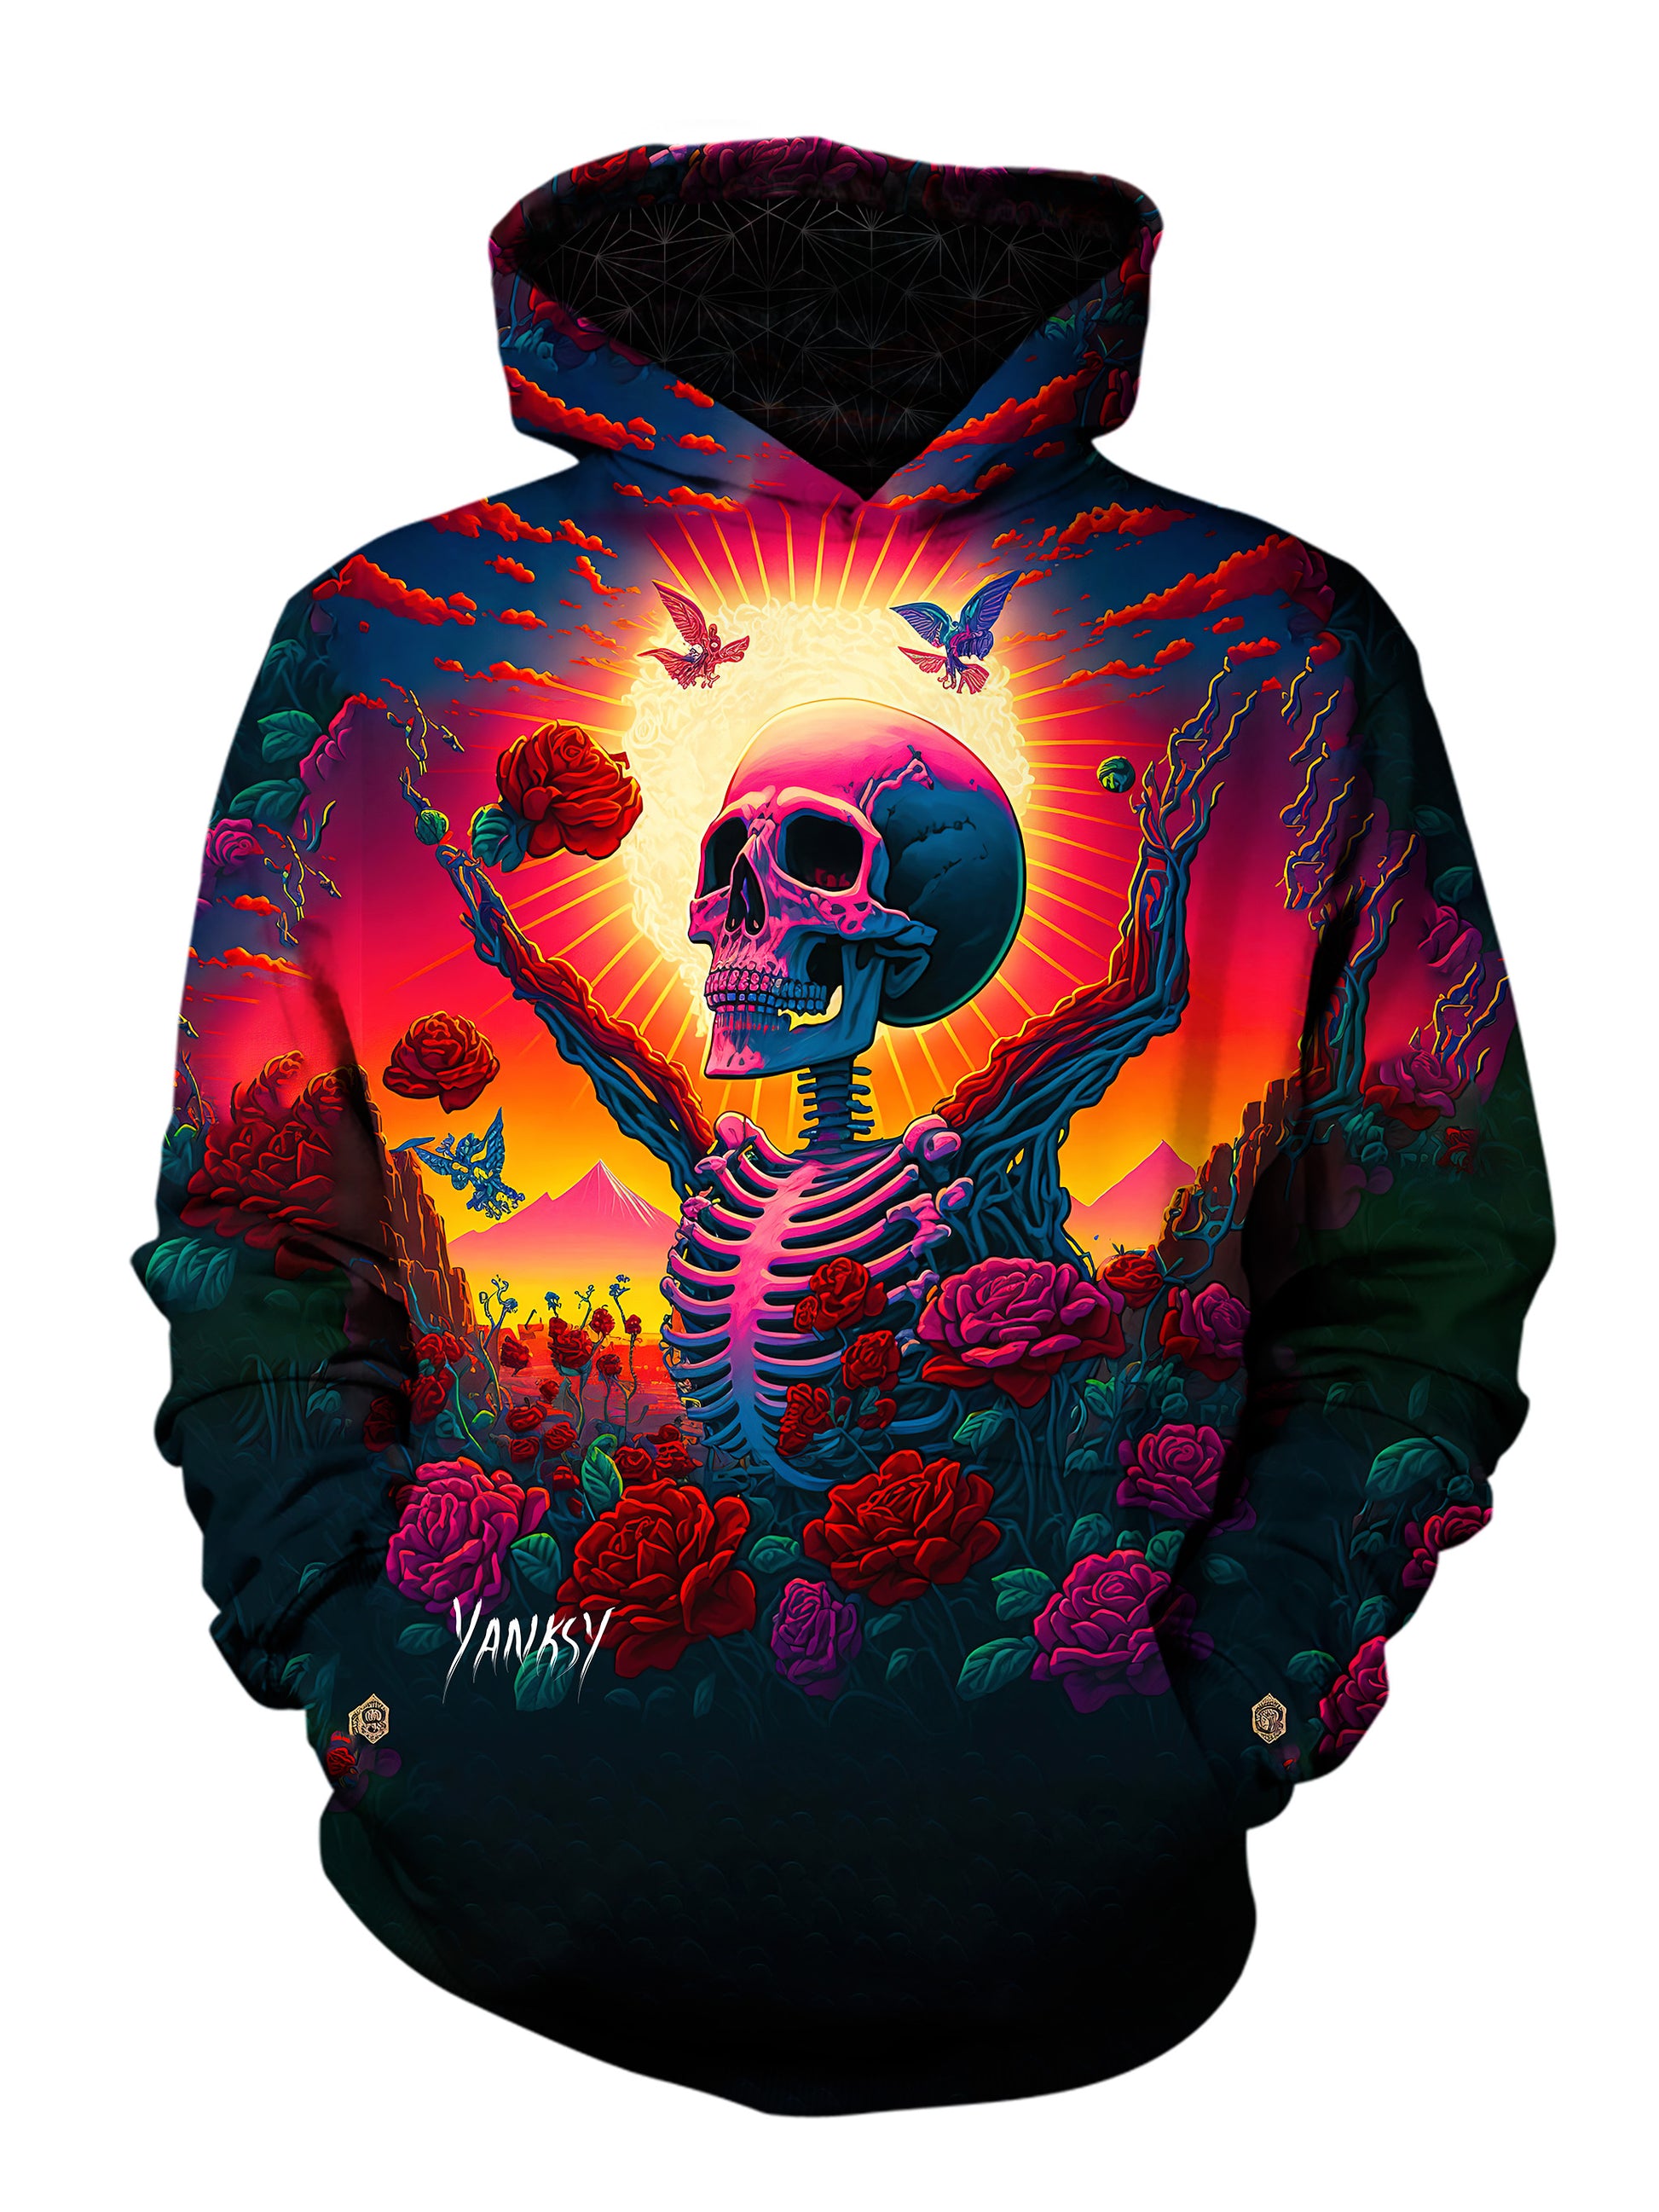 mesmerizing sublimation pullover hoodie